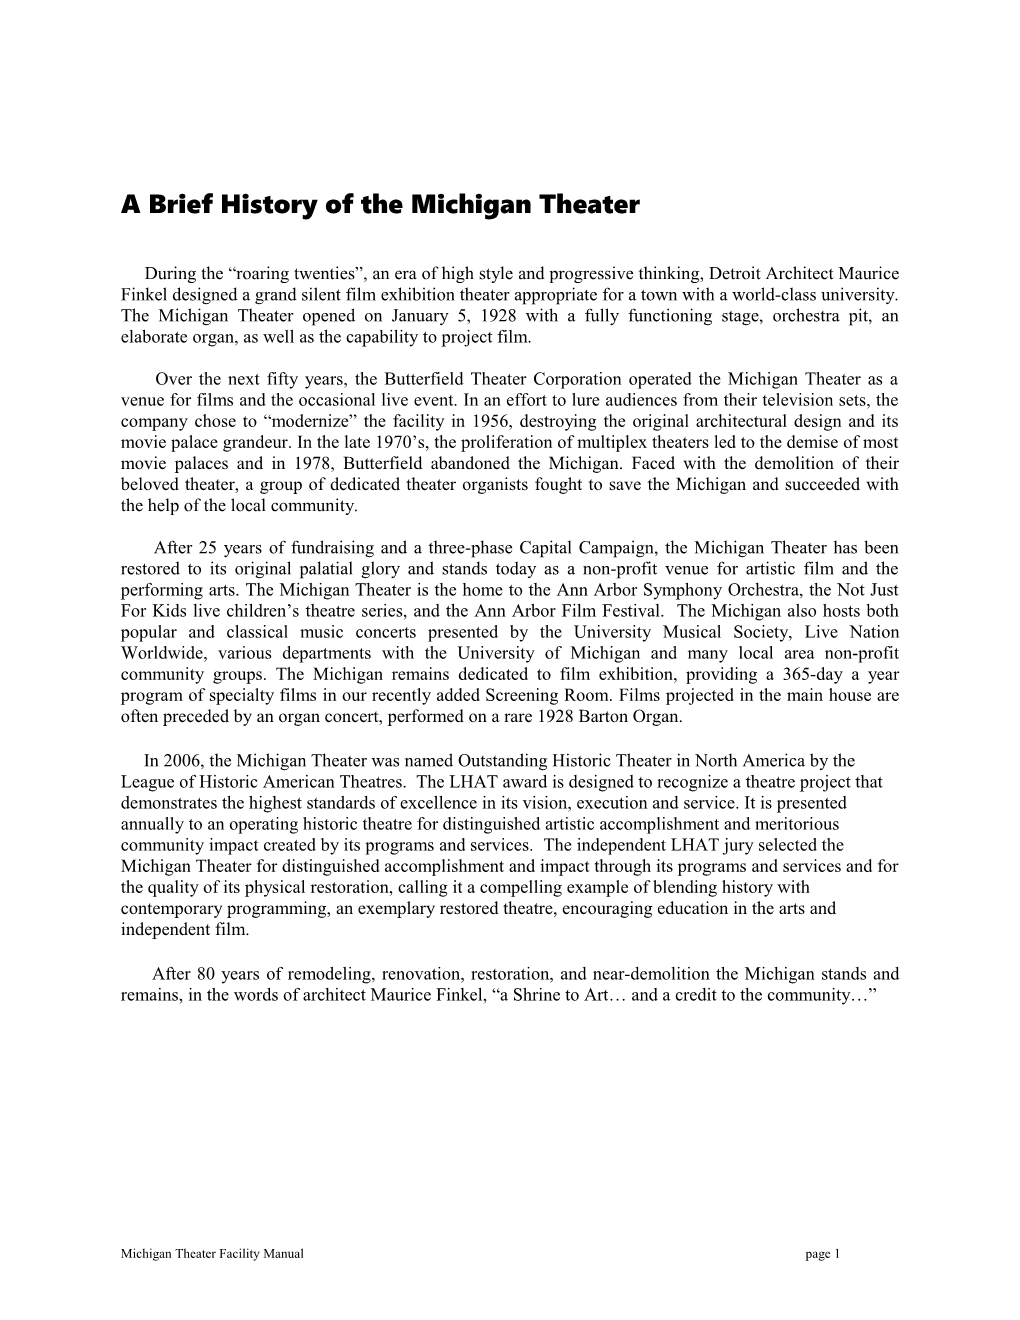 A Brief History of the Michigan Theater